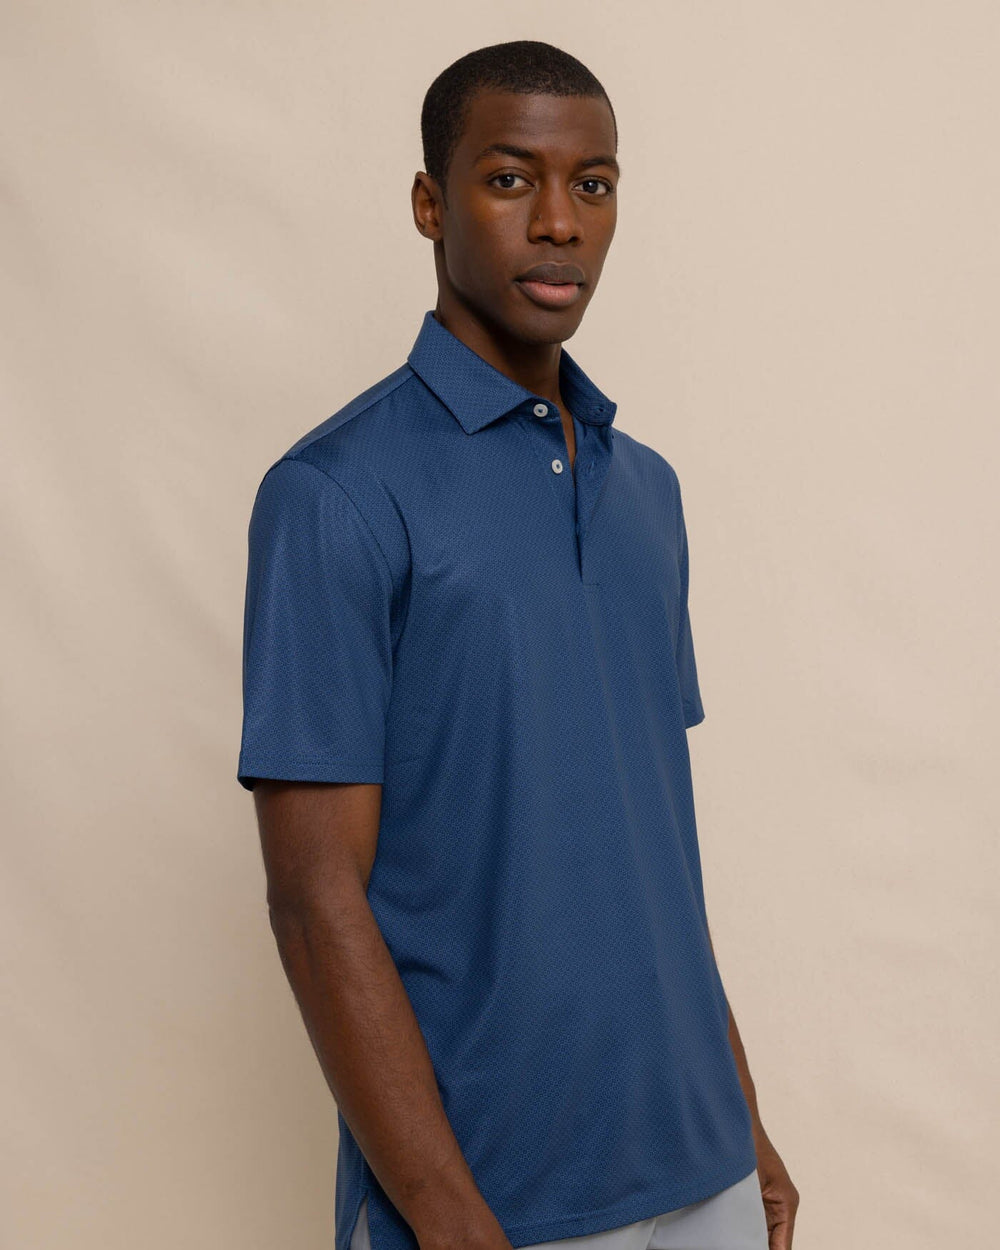 The front view of the Southern Tide Driver Coastal Geo Polo Shirt by Southern Tide - Dress Blue